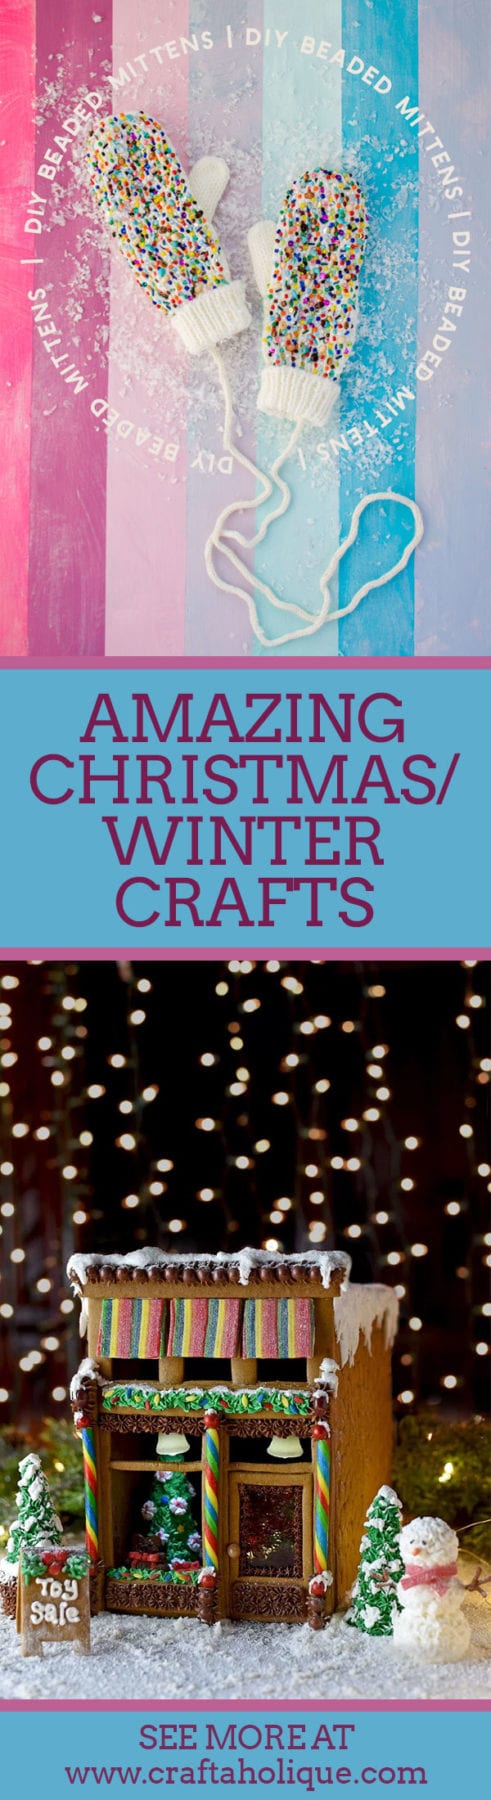 Amazing Christmas Crafts from talented bloggers around the web